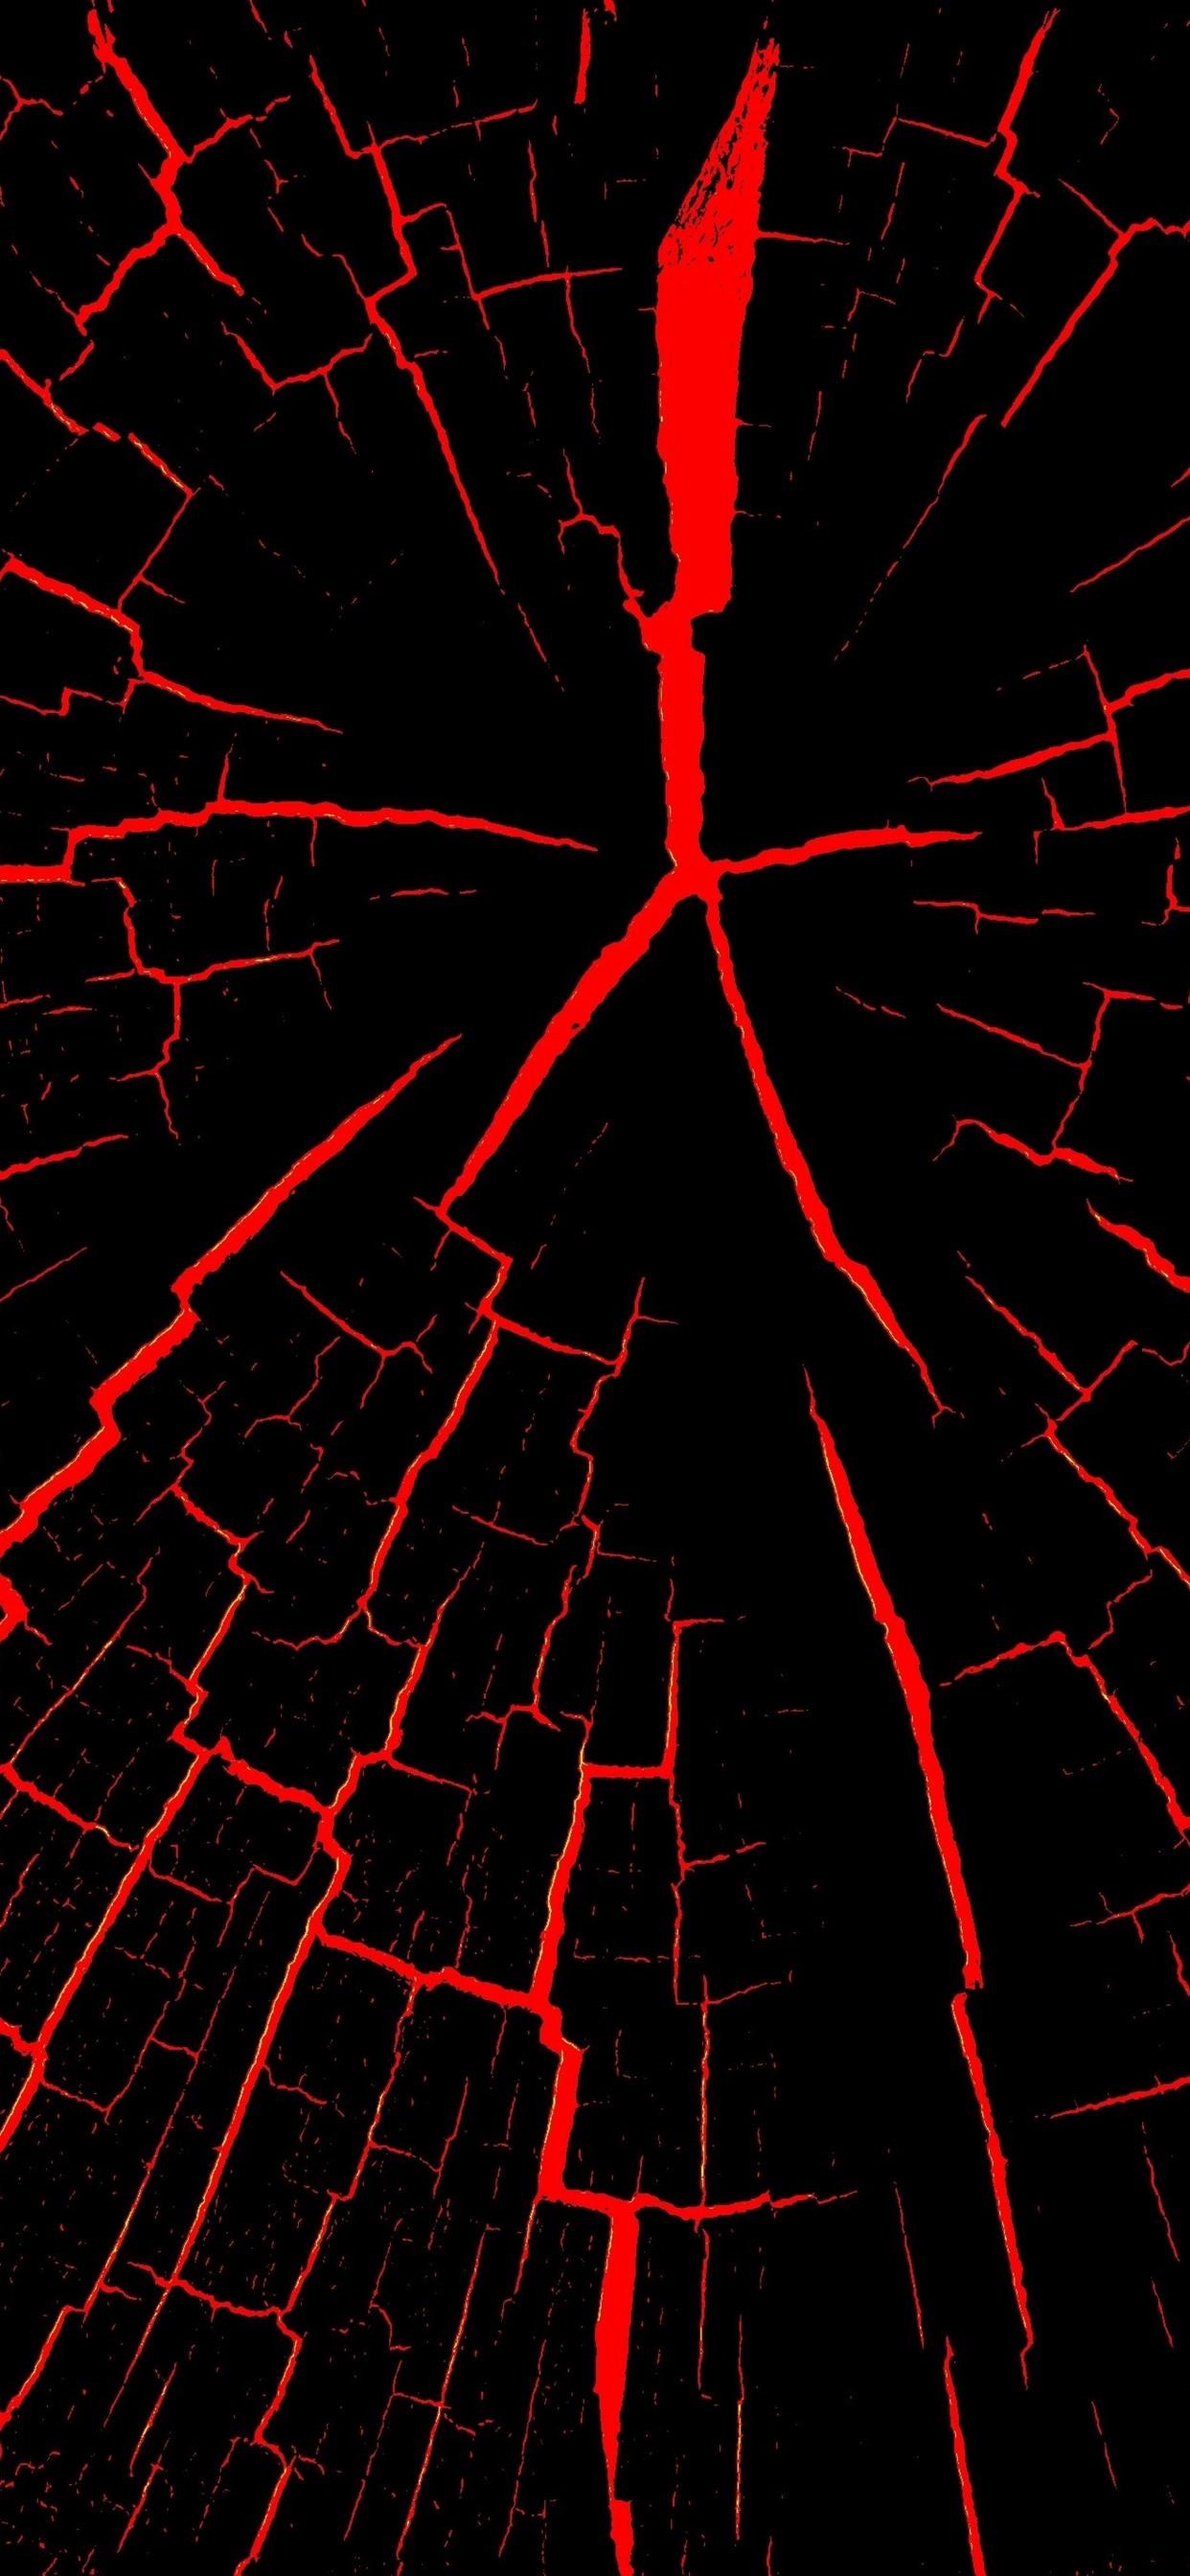 Cracks, Black And Red, Abstract 1242x2688 IPhone 11 Pro XS Max Wallpaper, Background, Picture, Image